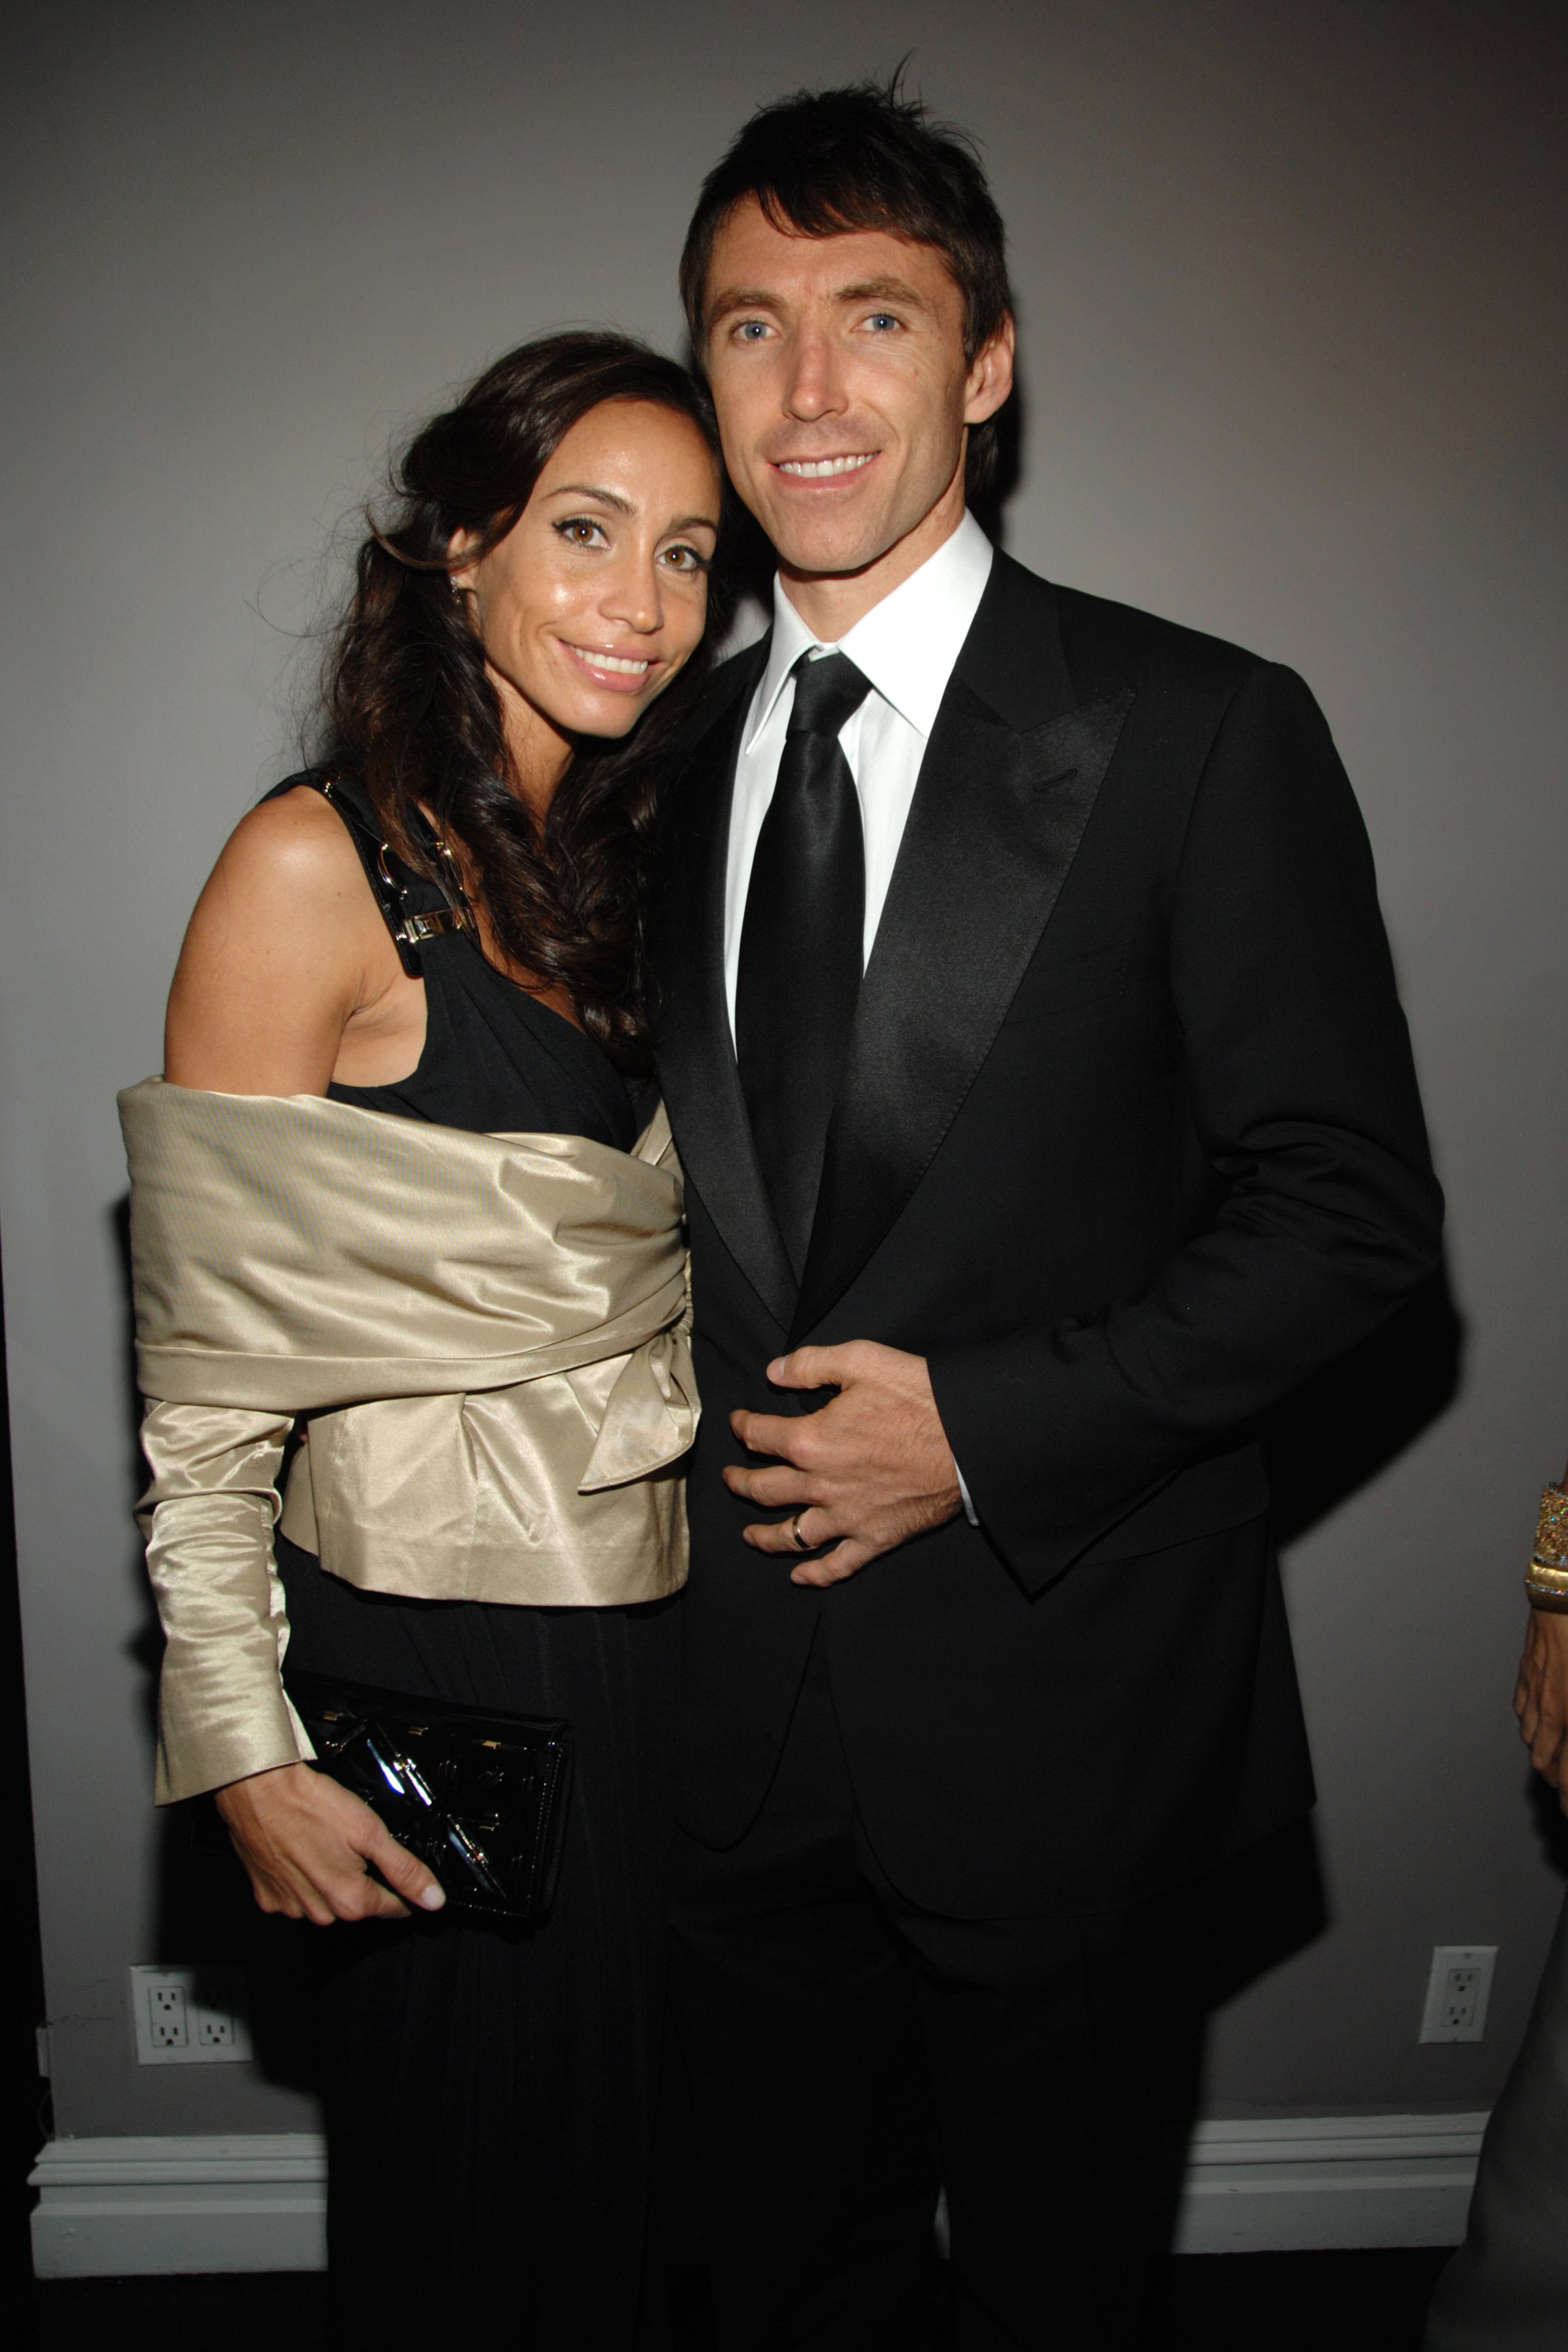 Alejandra Amarilla Nash and Steve Nash during the Nina Ricci after party for Met Ball hosted by Olivier Theyskens and Lauren Santo Domingo at Philippe on May 5, 2008 in New York City. | Source: Getty Images